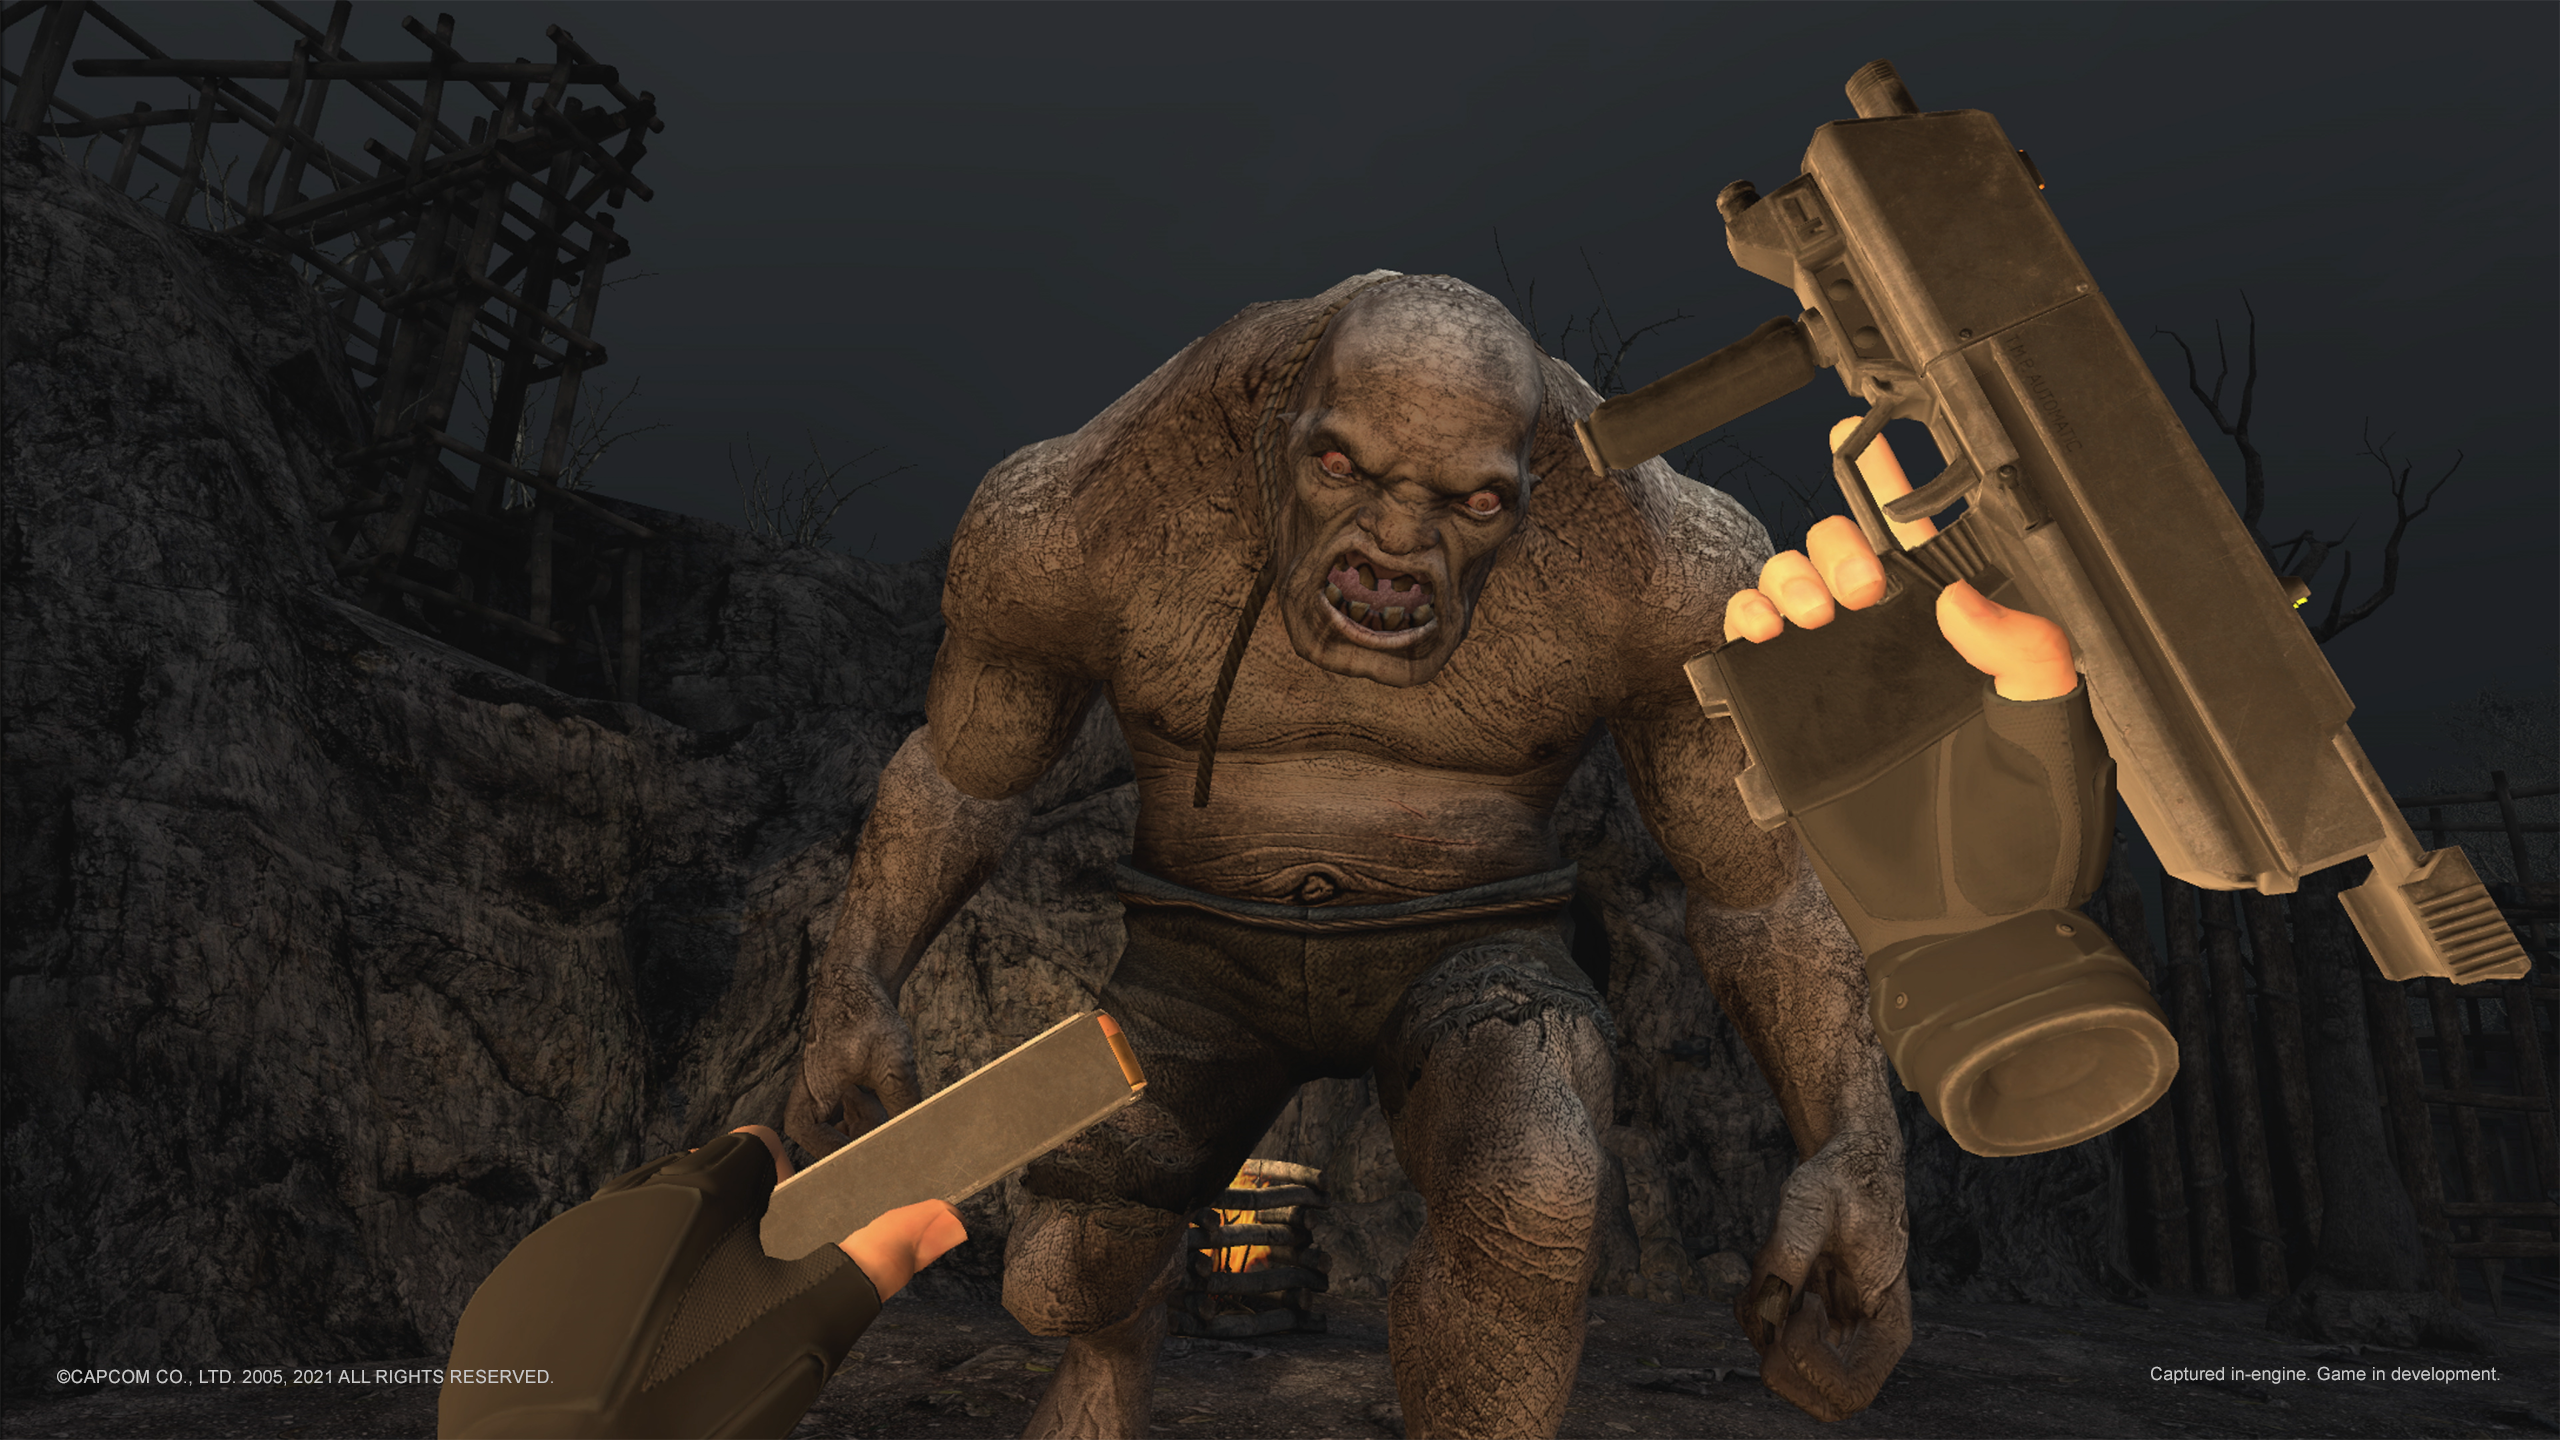 Player reloading an automatic gun as a large creature stares at them with bared teeth in Resident Evil 4 VR